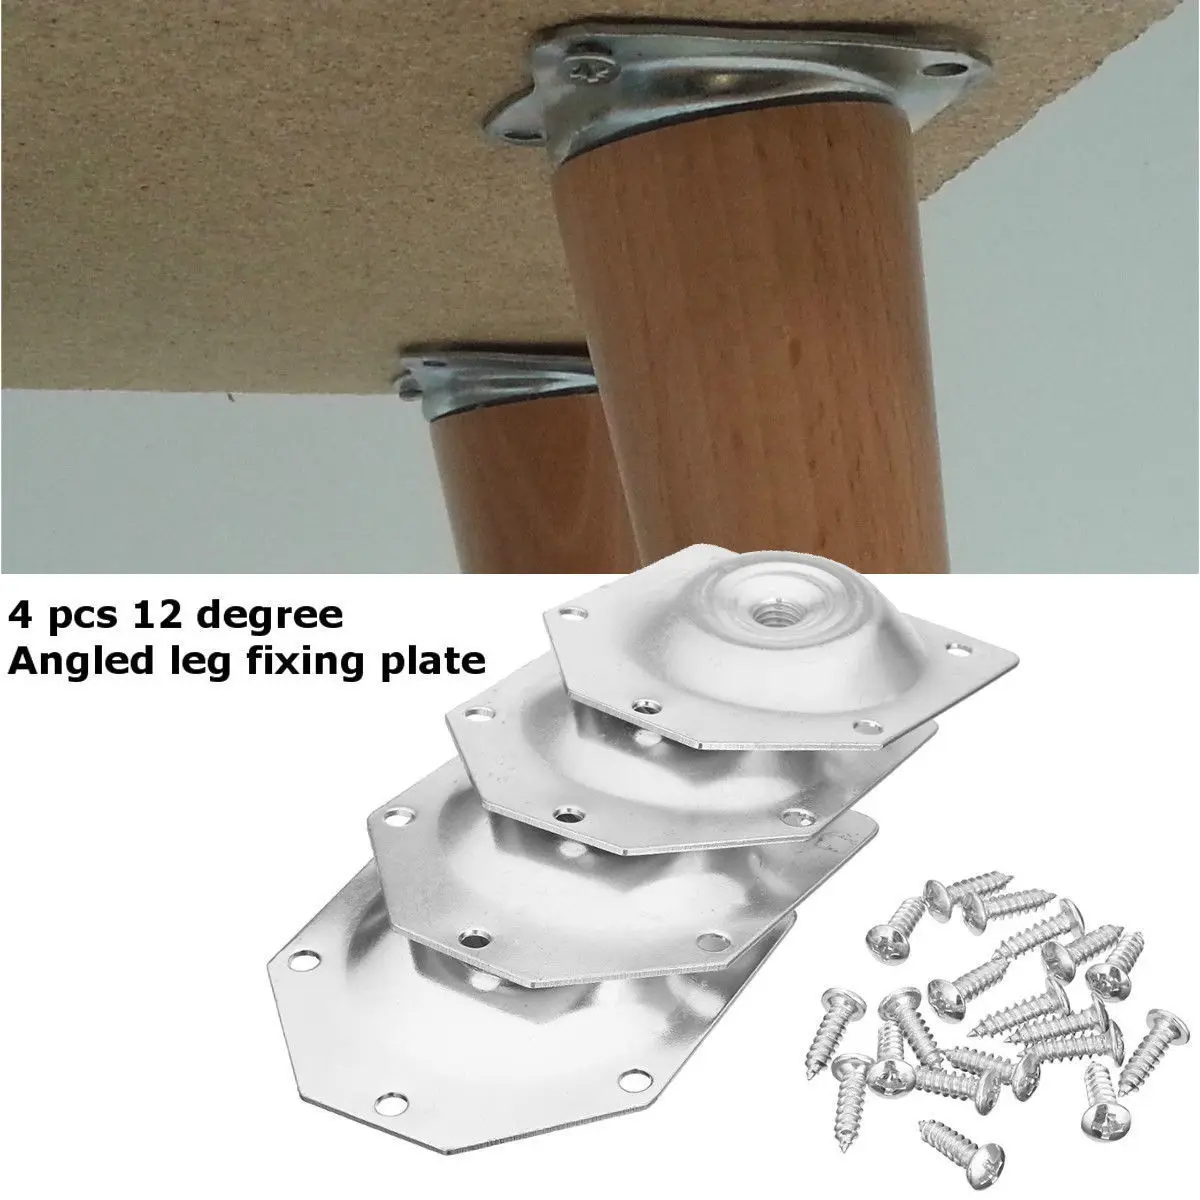 4pcs Angled Legs Fixing Plate Bracket Furniture Table Feet Set W/Screws Solid Wood Connecting Iron Sheet